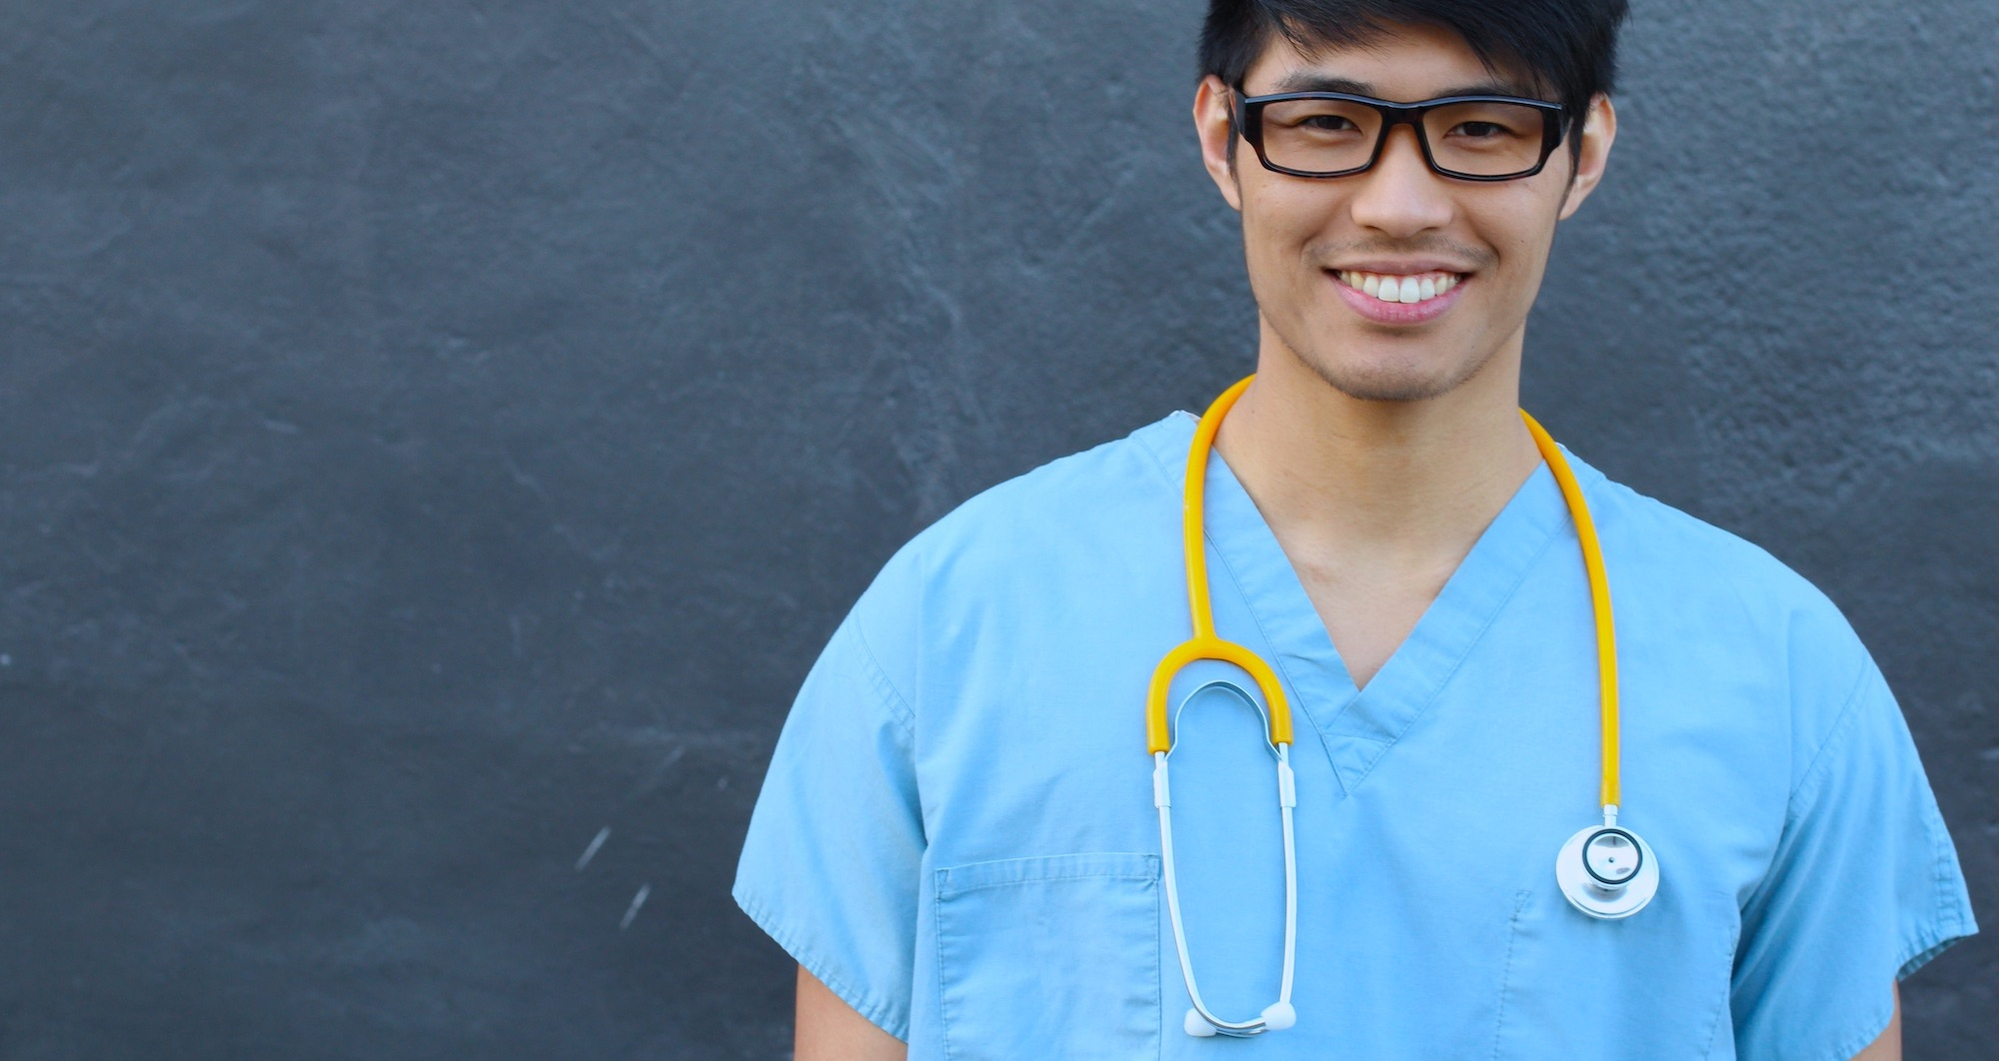 Image shows a happy male student nurse in scrubs smiling directly into camera